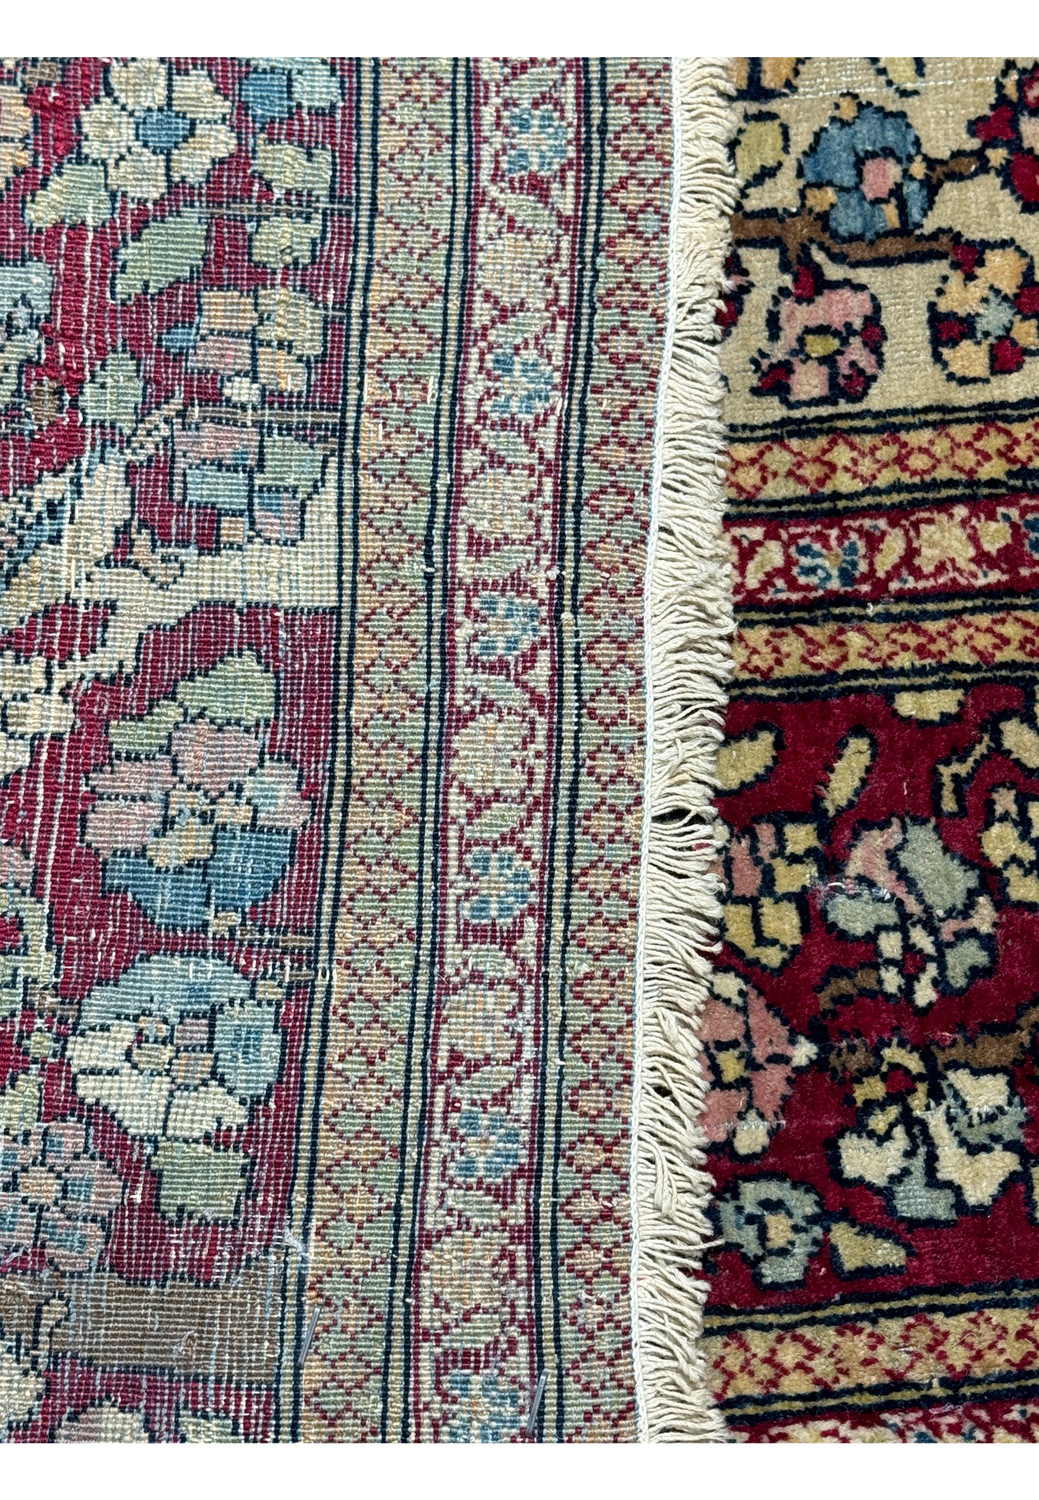 The underside of the rug, displaying the tightness of the weave and the rug's overall structural integrity.